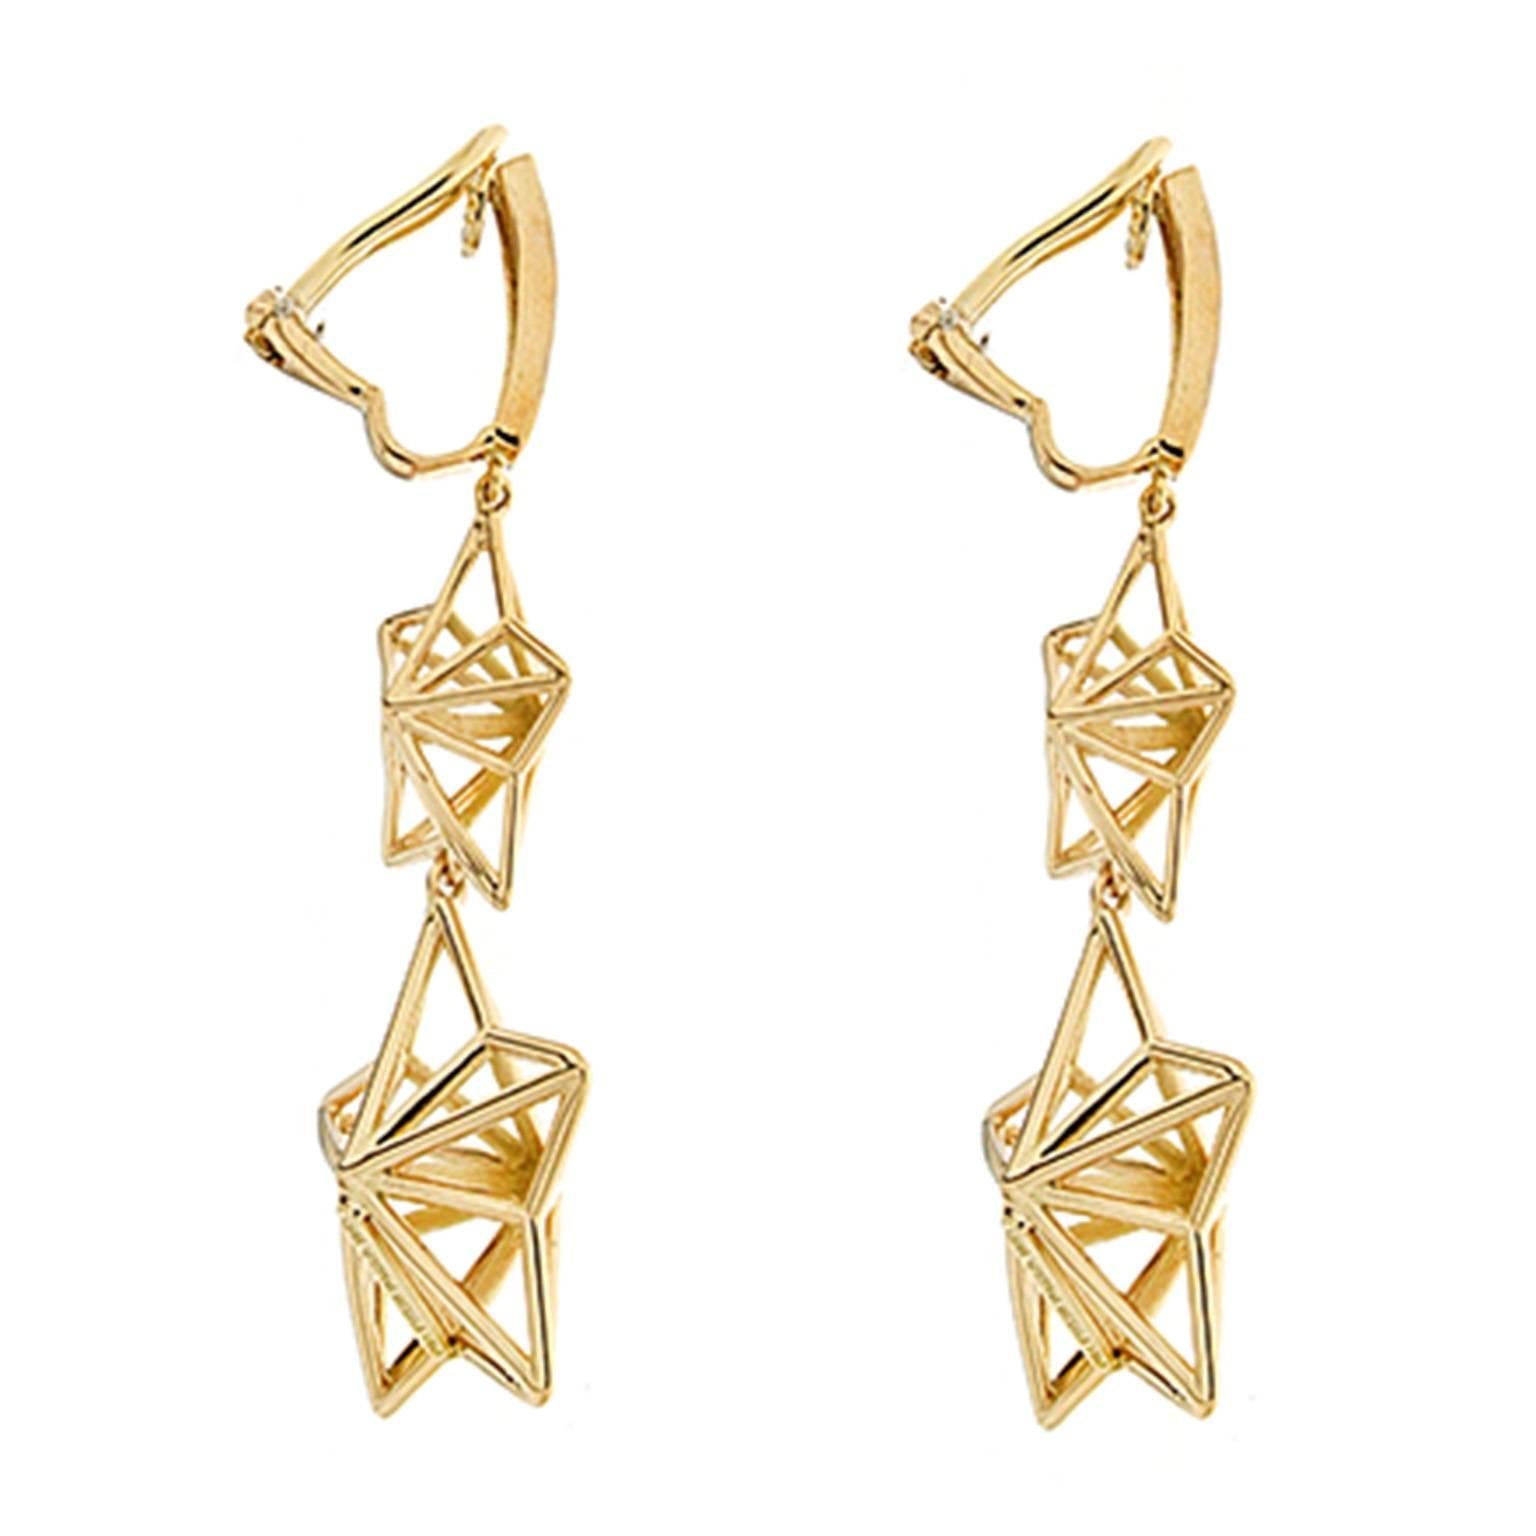 Valentin Magro Yellow Gold Diamond Star Dangling Earrings combine complex shapes with whimsical design. A series of 18k yellow gold bars radiant from a single hub. They join with more gold to form triangles, then rhombuses and finally